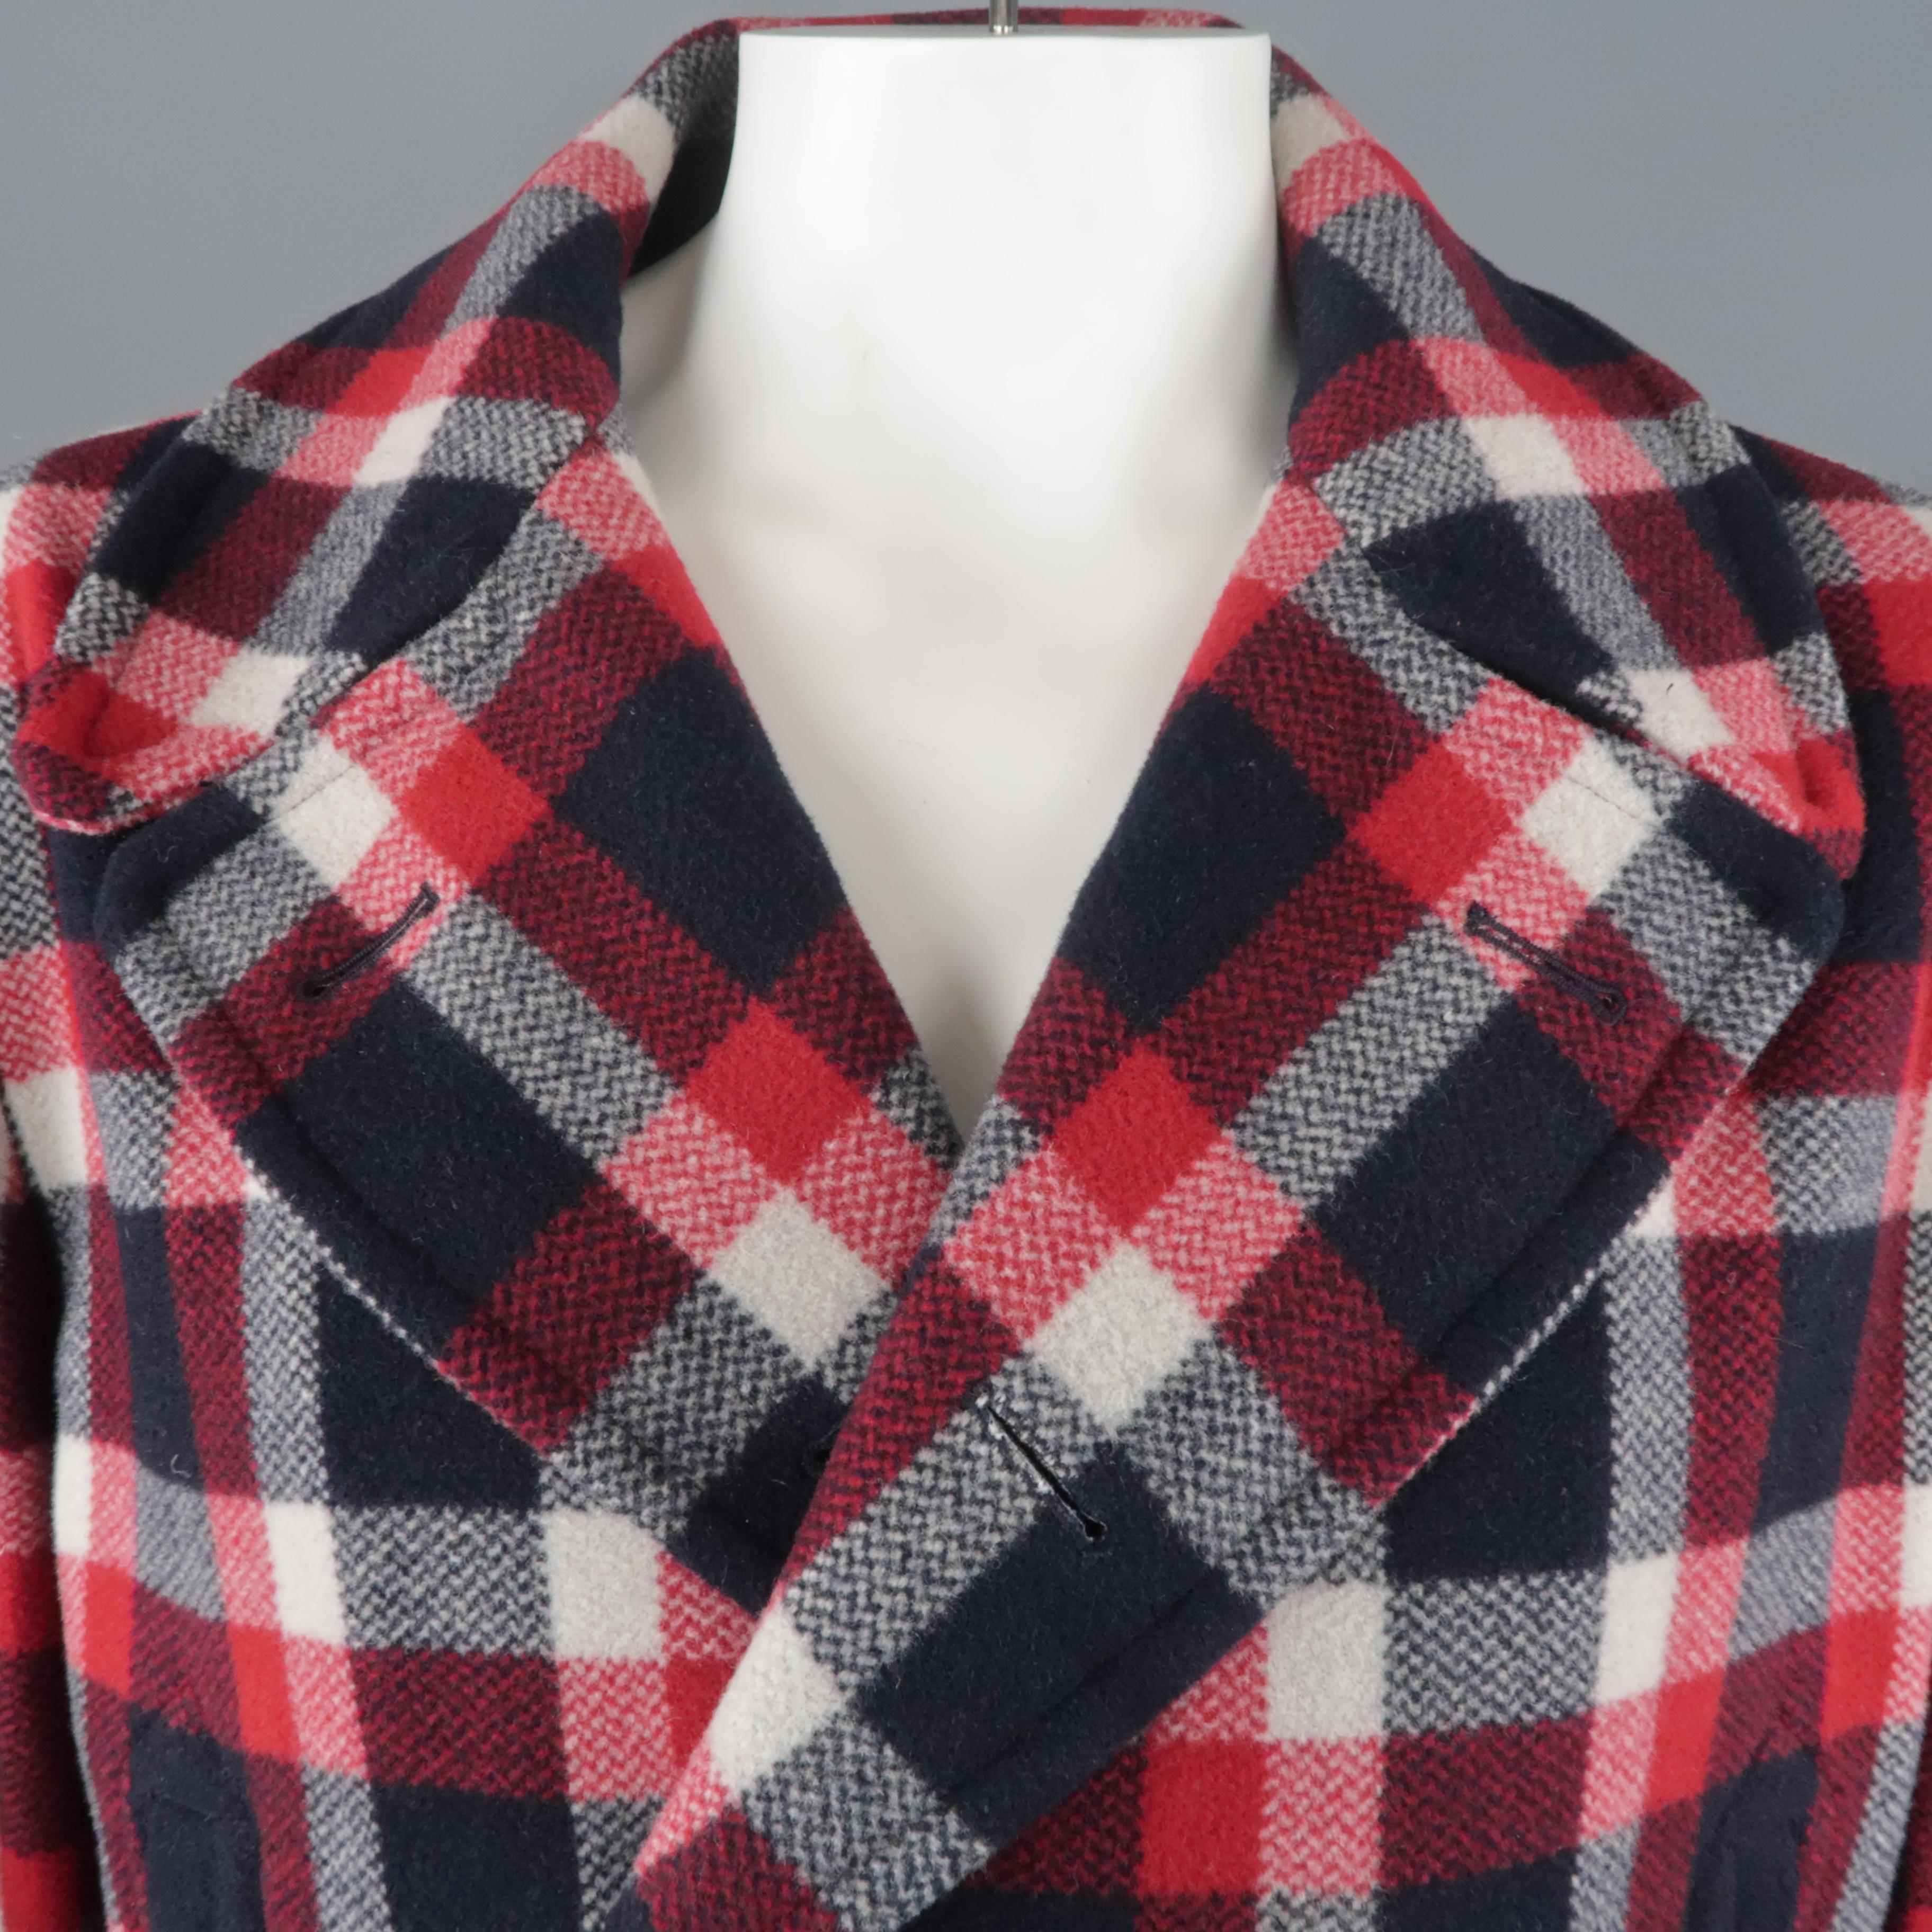 Women's or Men's RALPH LAUREN XL Red White Blue Plaid Wool / Nylon Double Breasted Peacoat